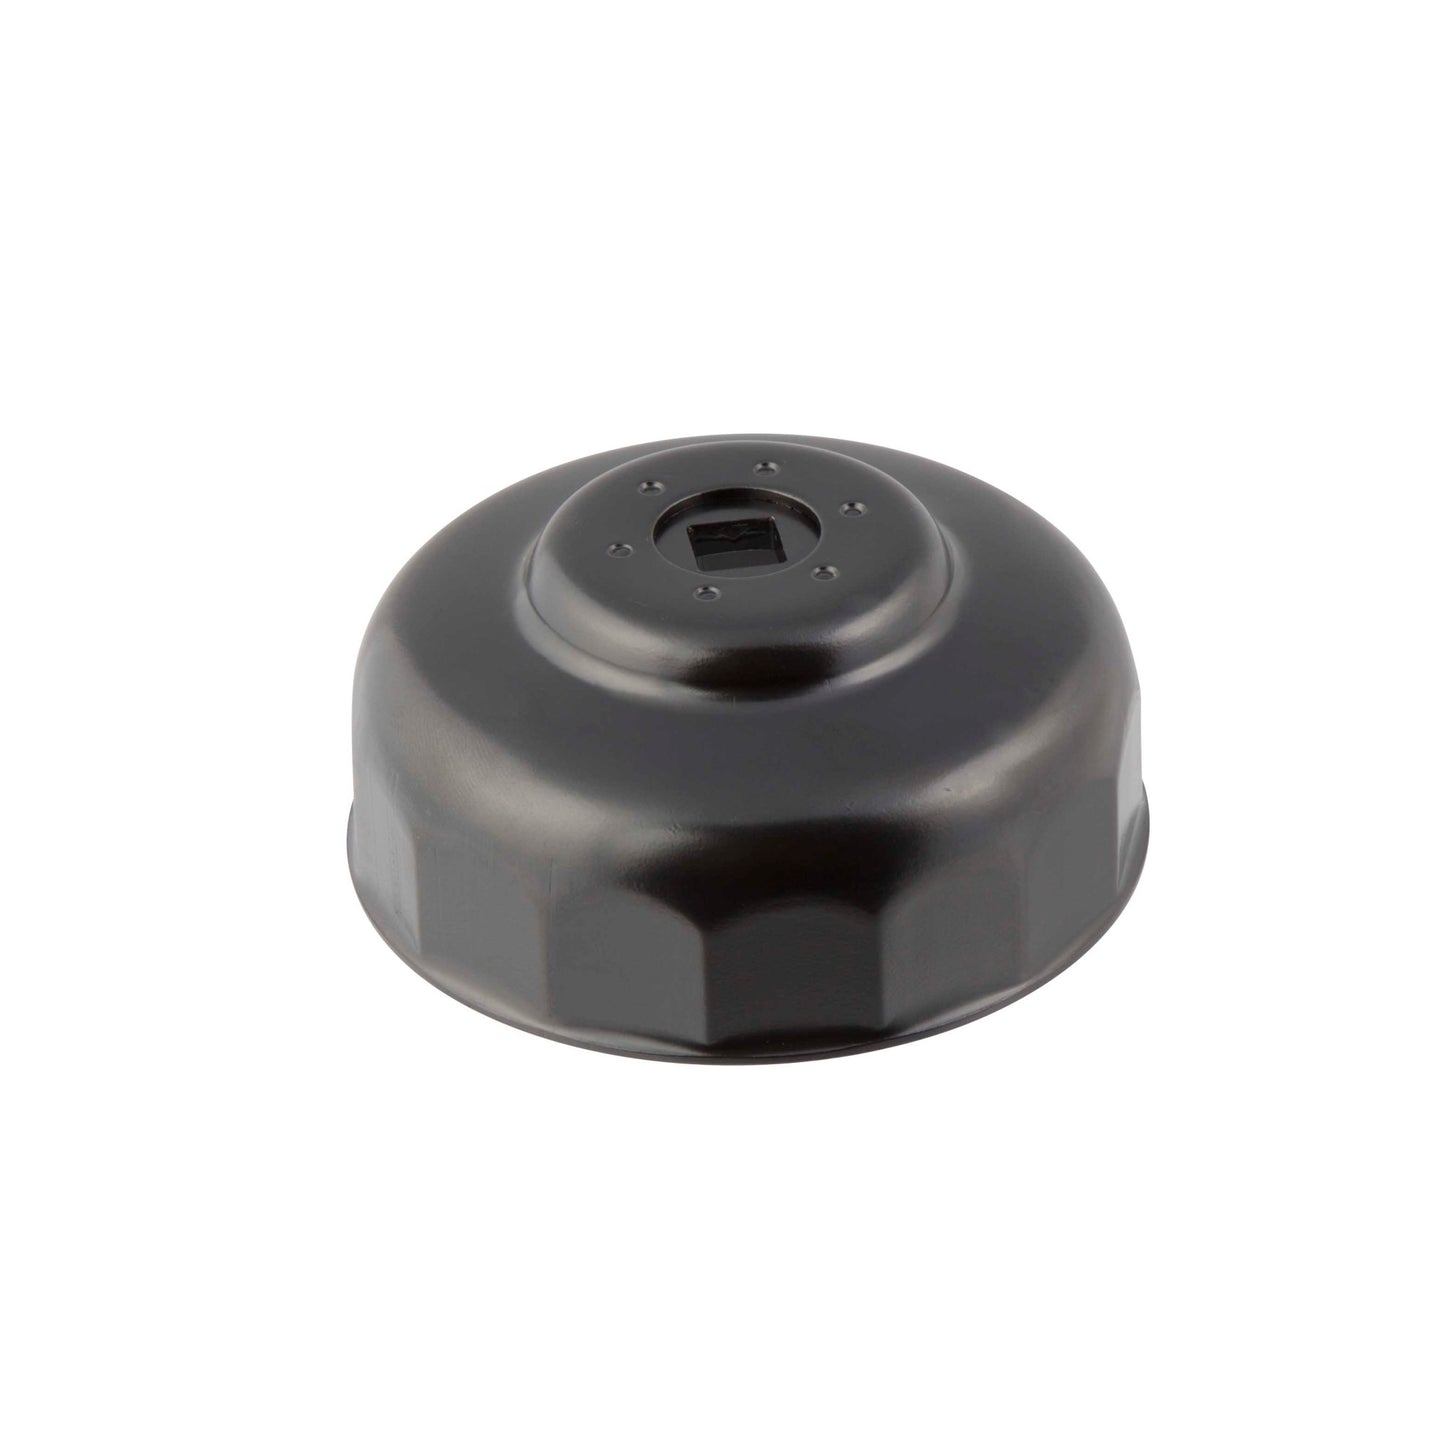 Oil Filter Cap Wrench for Hyundai, 88mm x 15 Flute